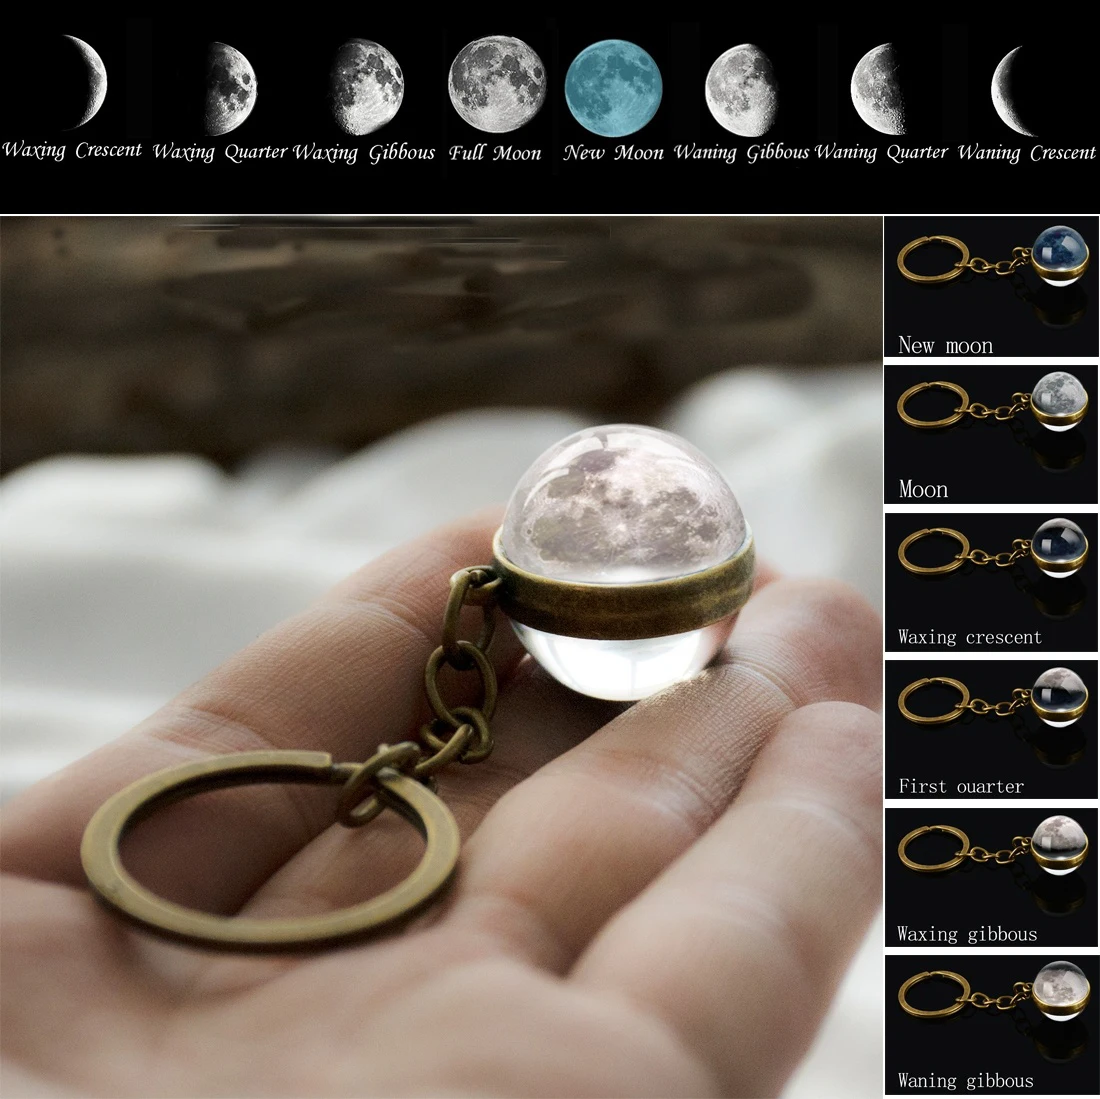 Moon Phase Image Keychain Planet Nebula Space Keyrings Galaxy Universe Moon Earth Sun Mars Solar System Double Sided Glass Ball